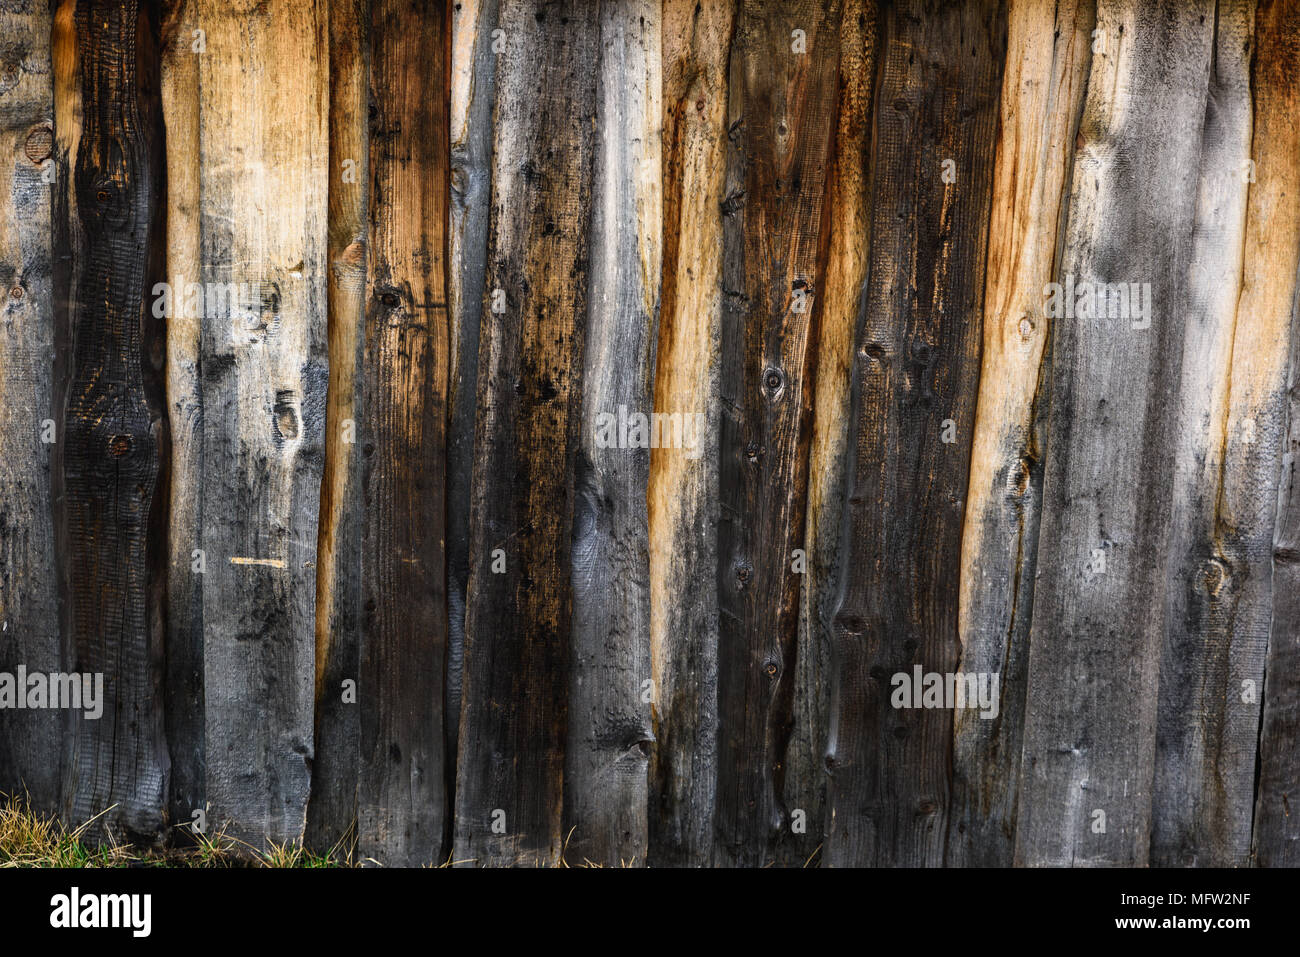 old wooden fence, aged natural vintage background Stock Photo